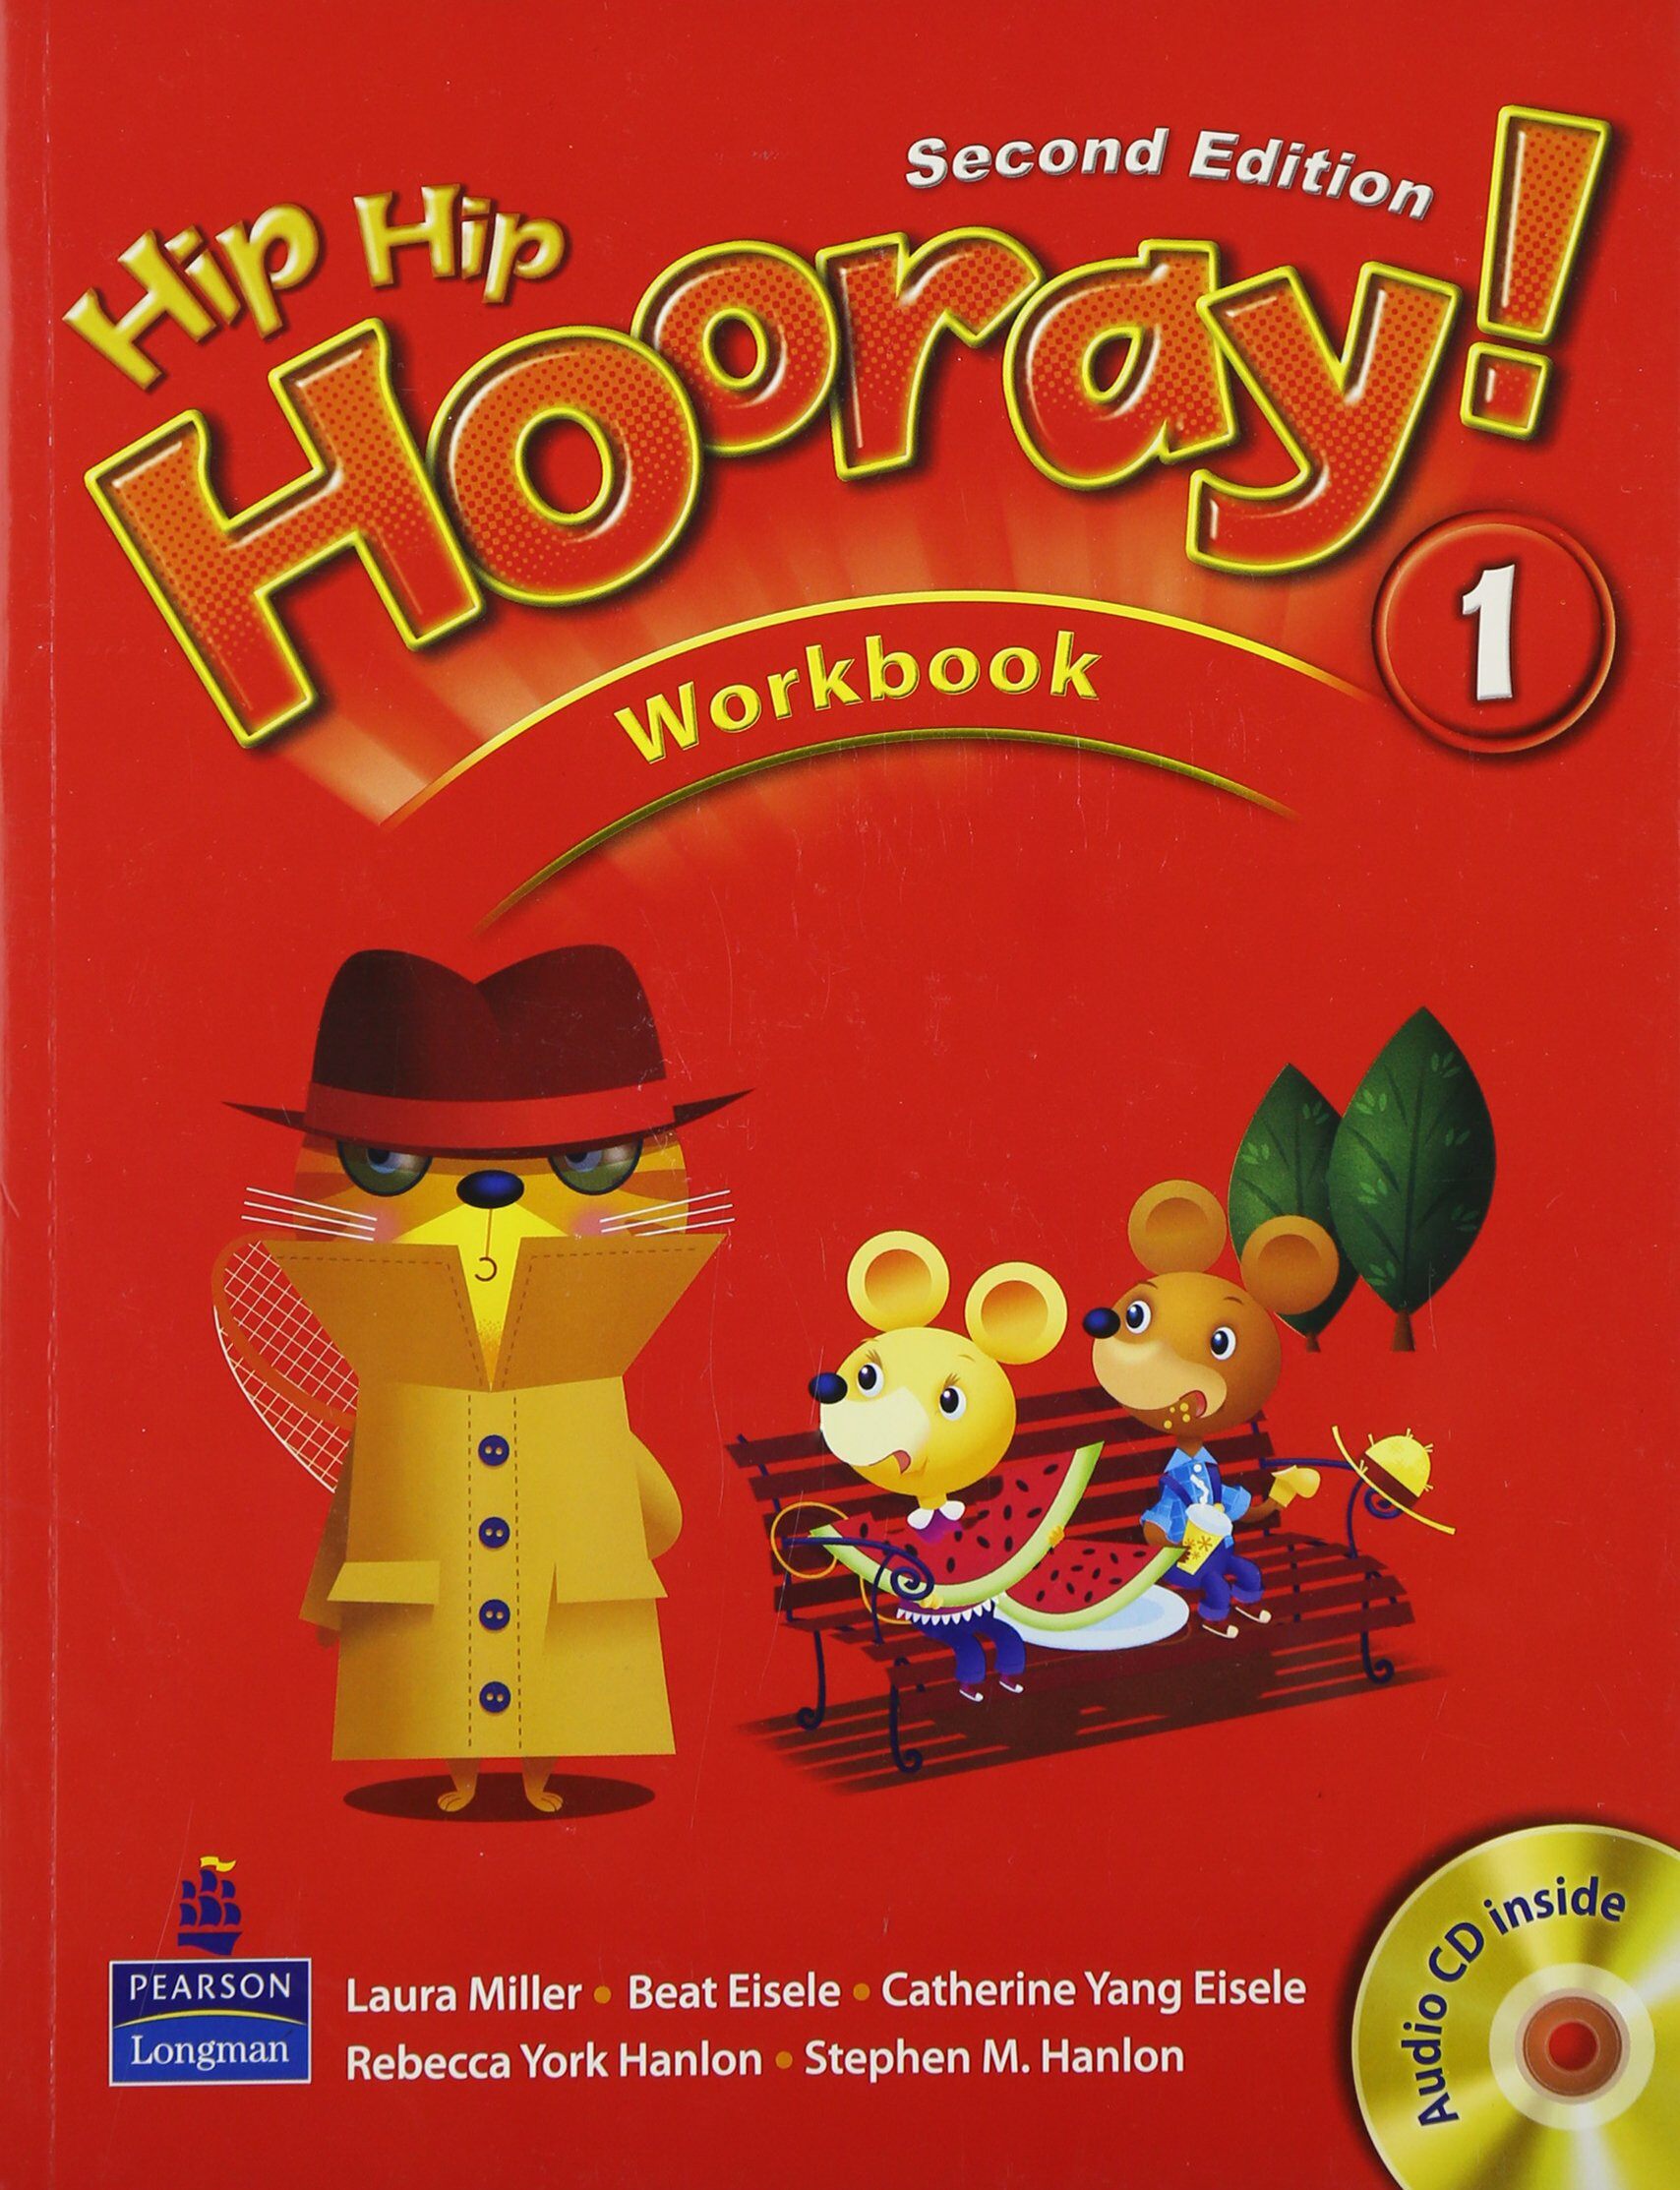 Hip Hip Hooray! 1 : Workbook (Paperback + CD, 2nd Edition / for ASIA)